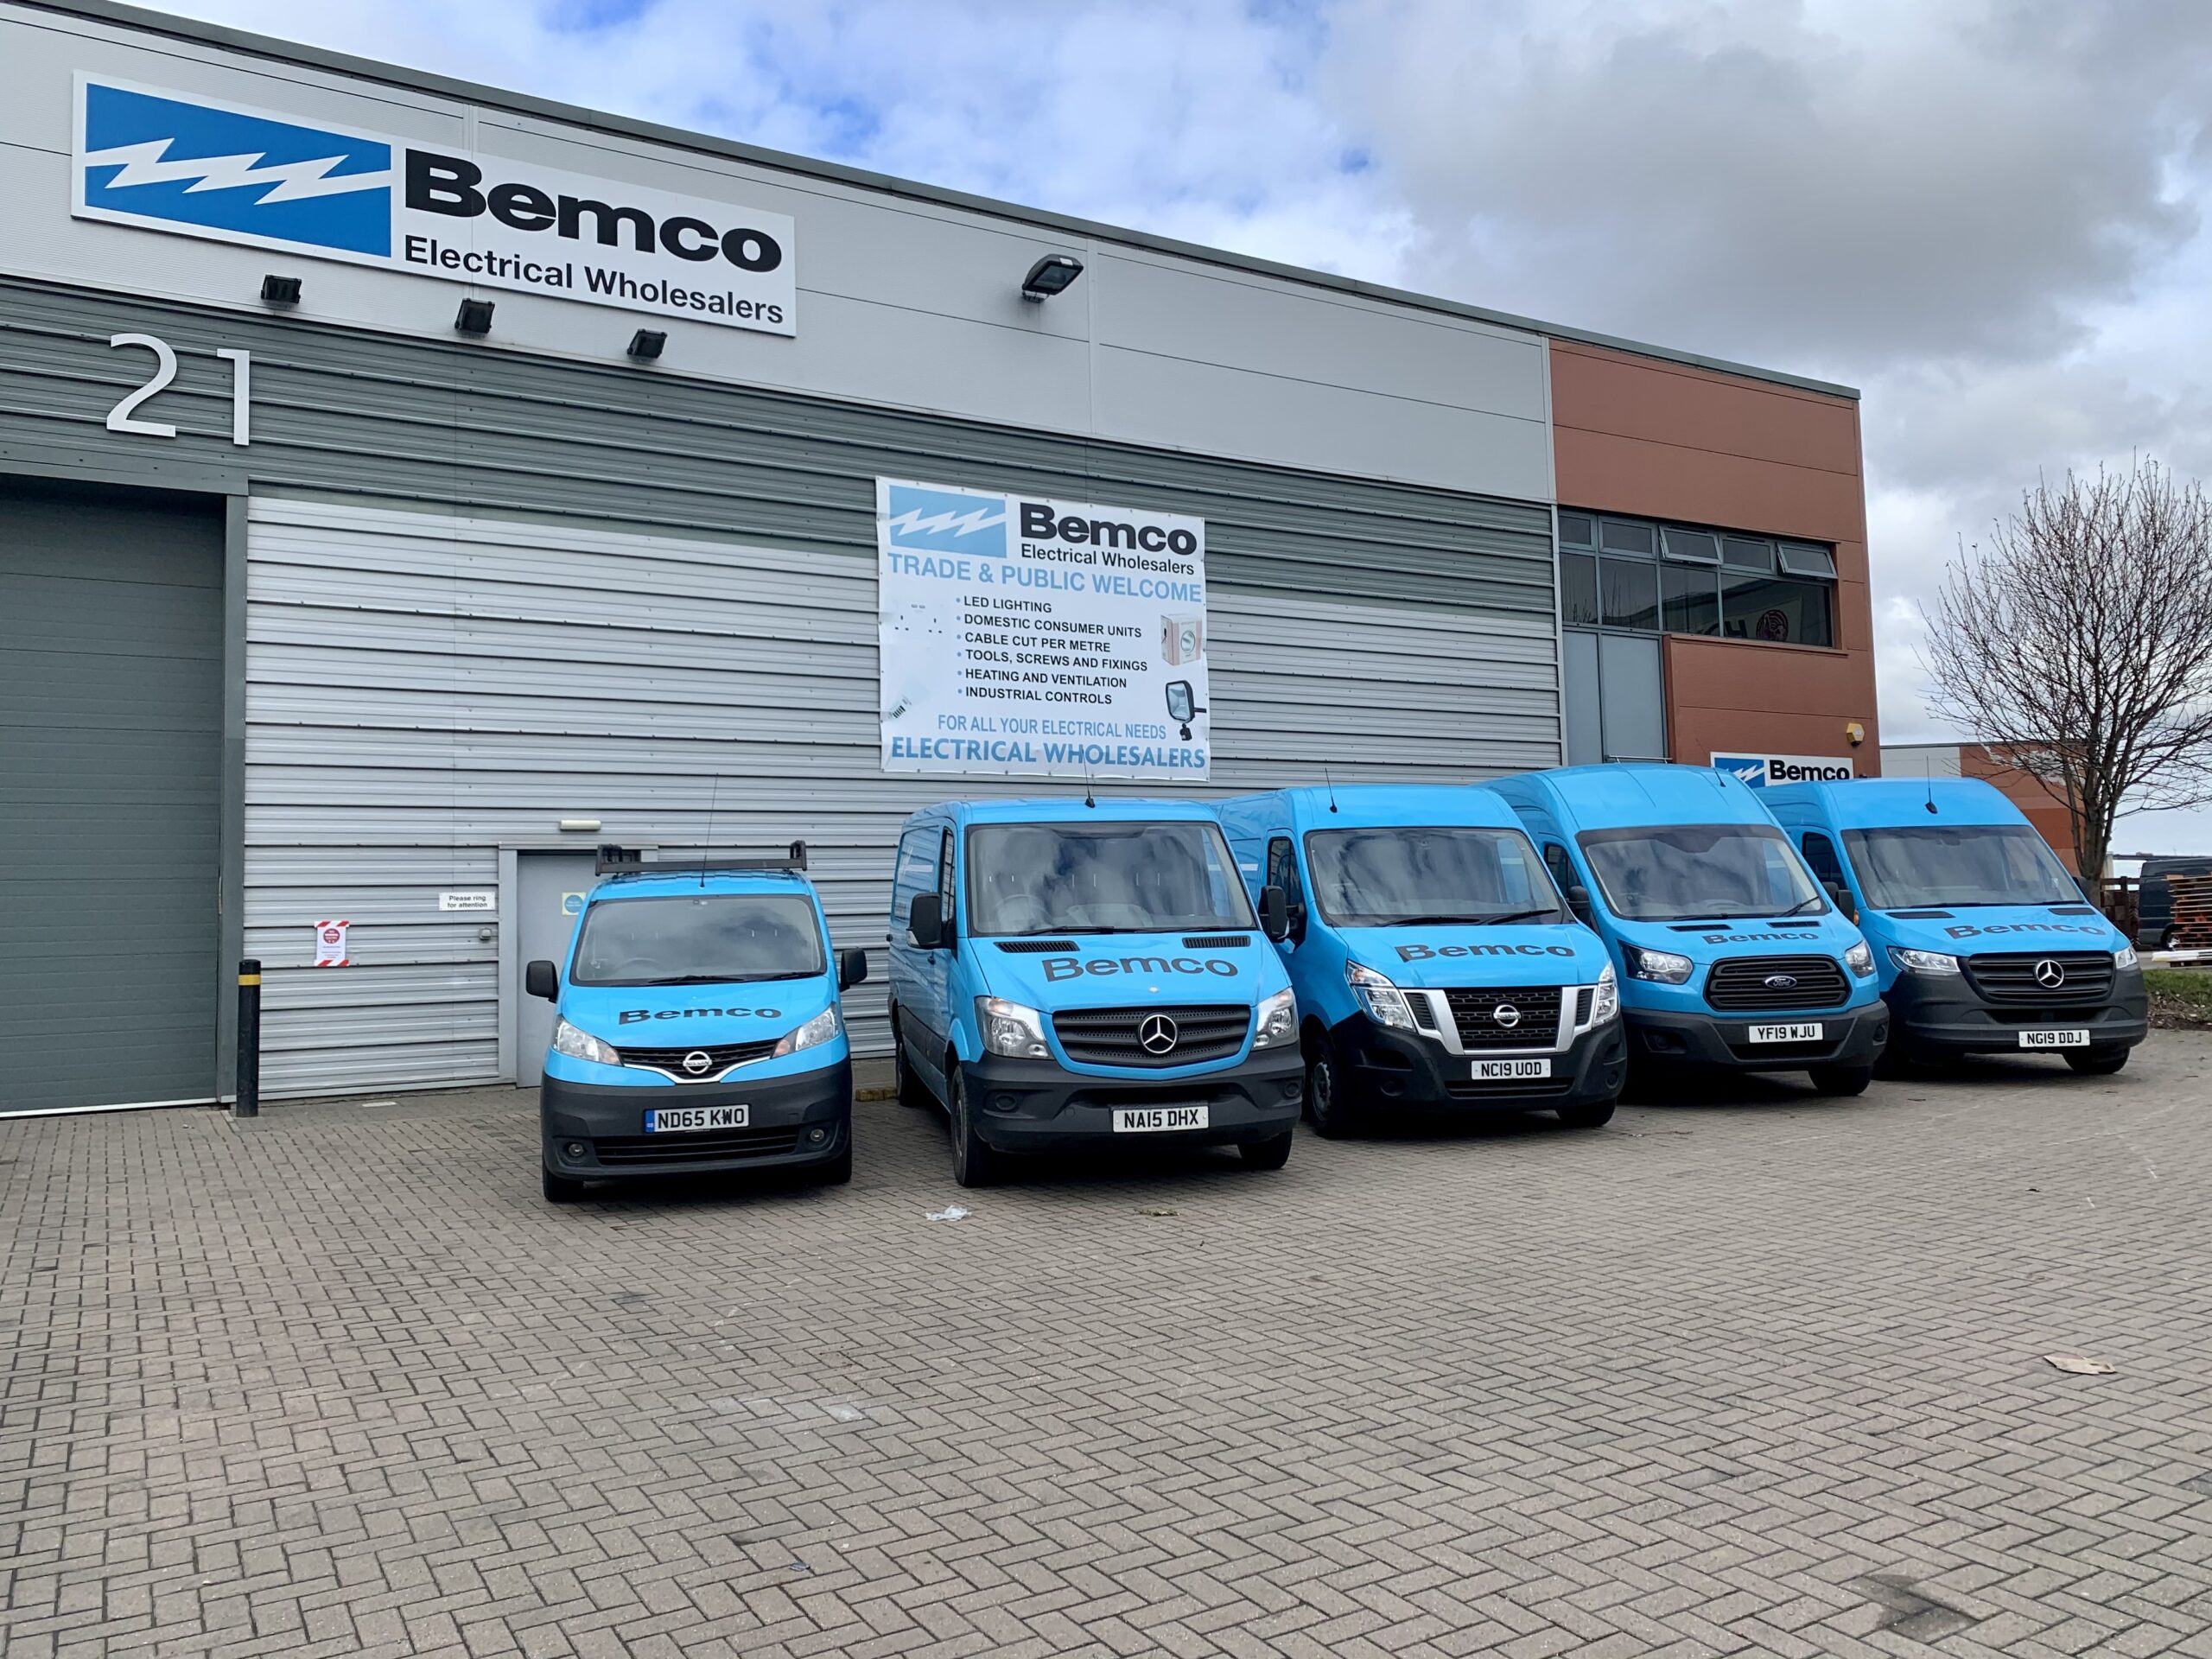 Bemco Dartford Branch - 24 Hour collection point available